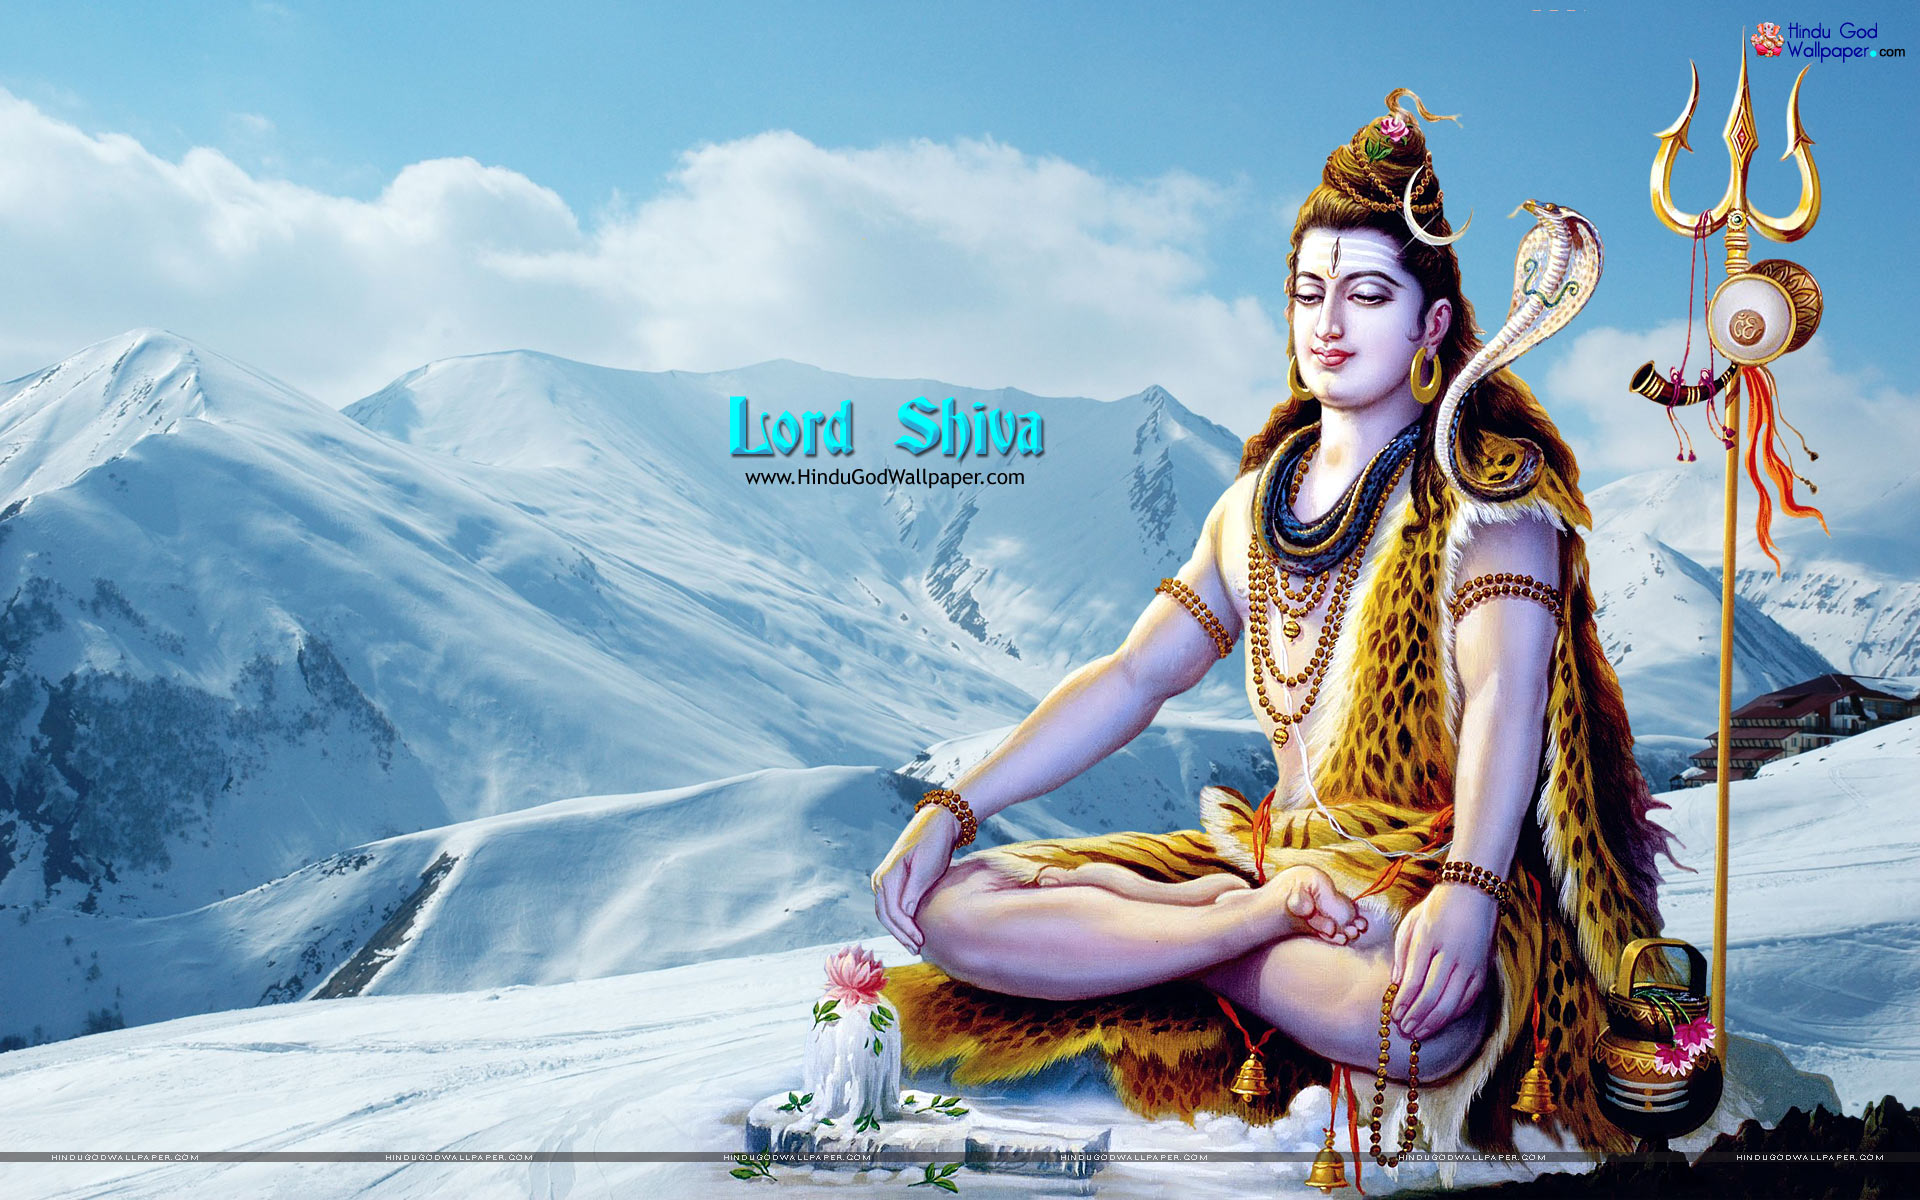 Free download Lord Shiva Wallpaper Picture Image Wallpaper Full Size Download [1920x1200] for your Desktop, Mobile & Tablet. Explore Hindu God HD Wallpaper 1080p. HD Hindu God Desktop Wallpaper